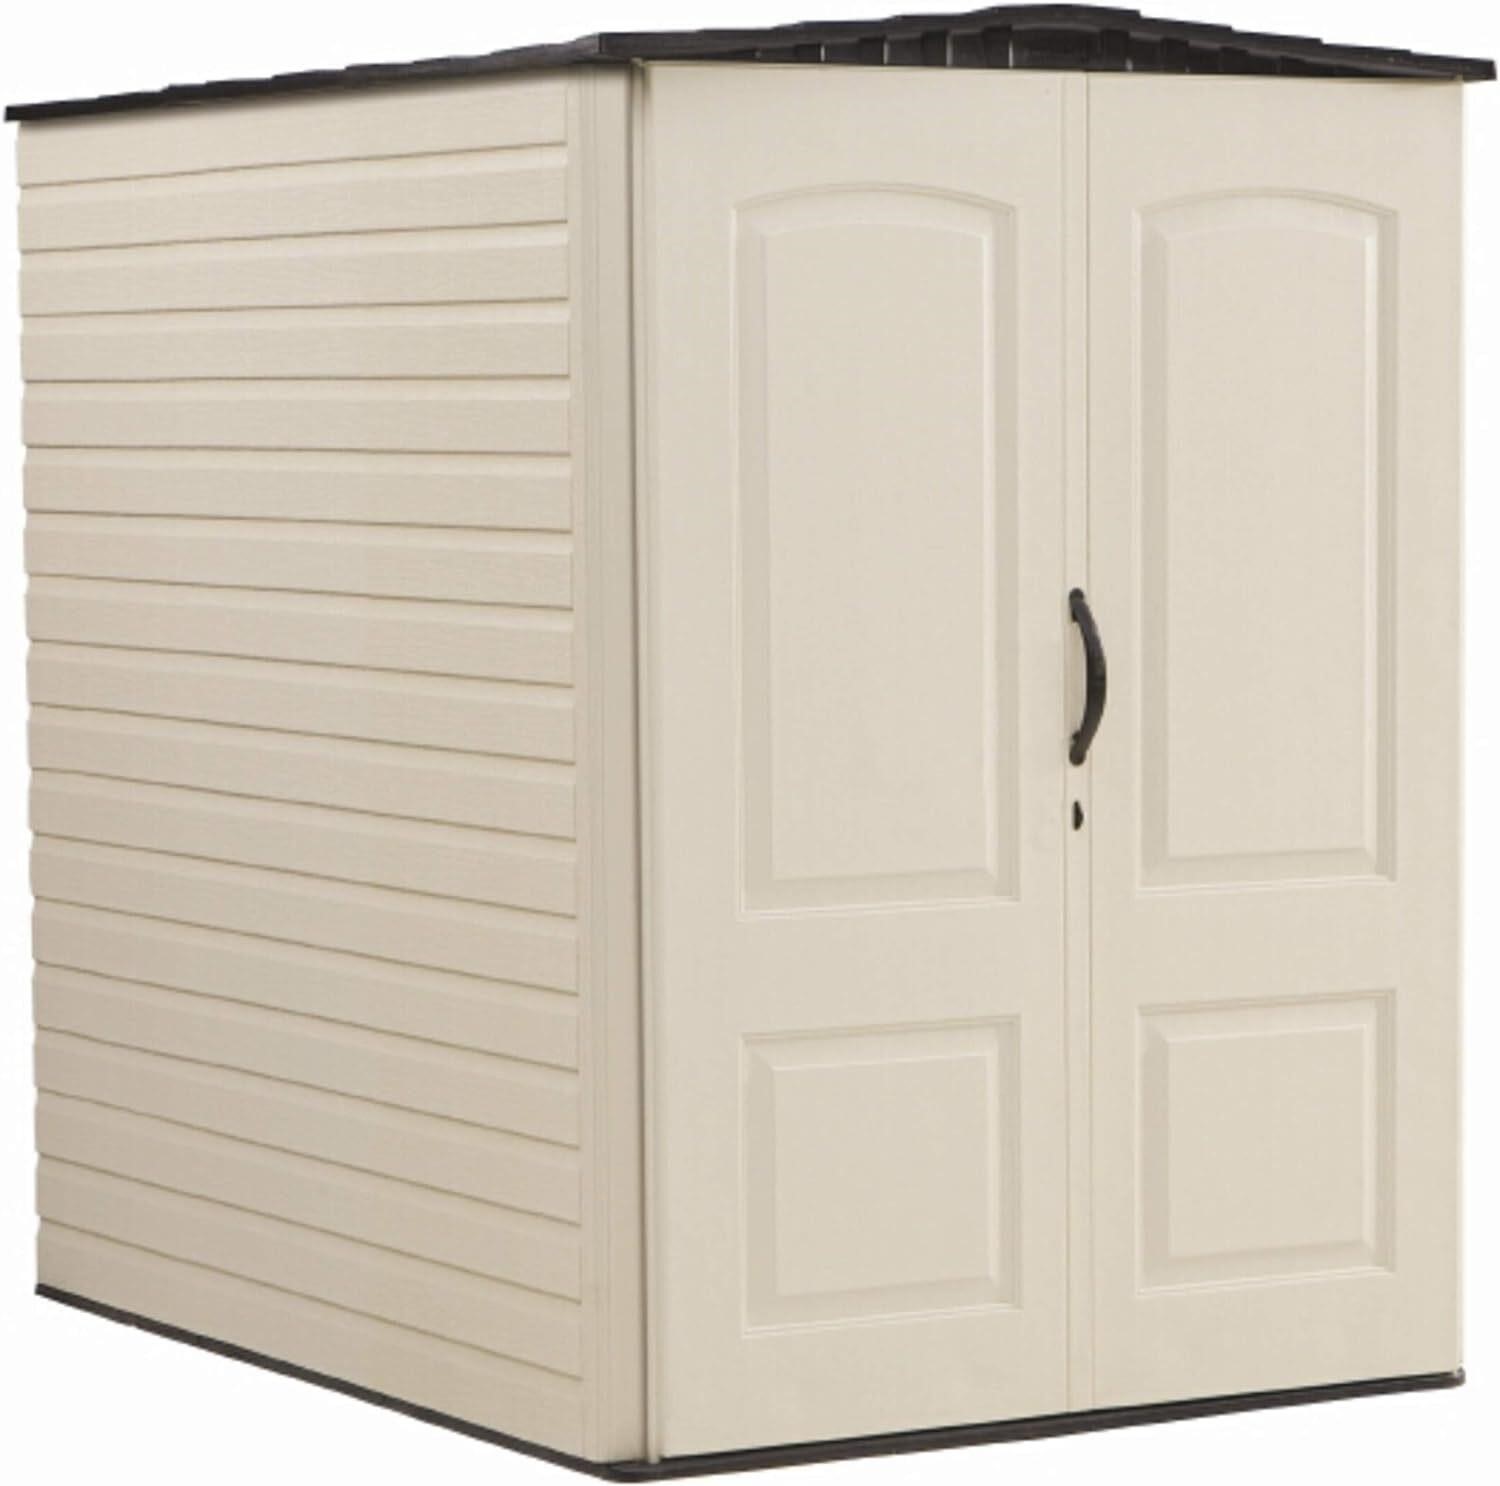 Rubbermaid 5x6 Ft. Resin Storage Shed